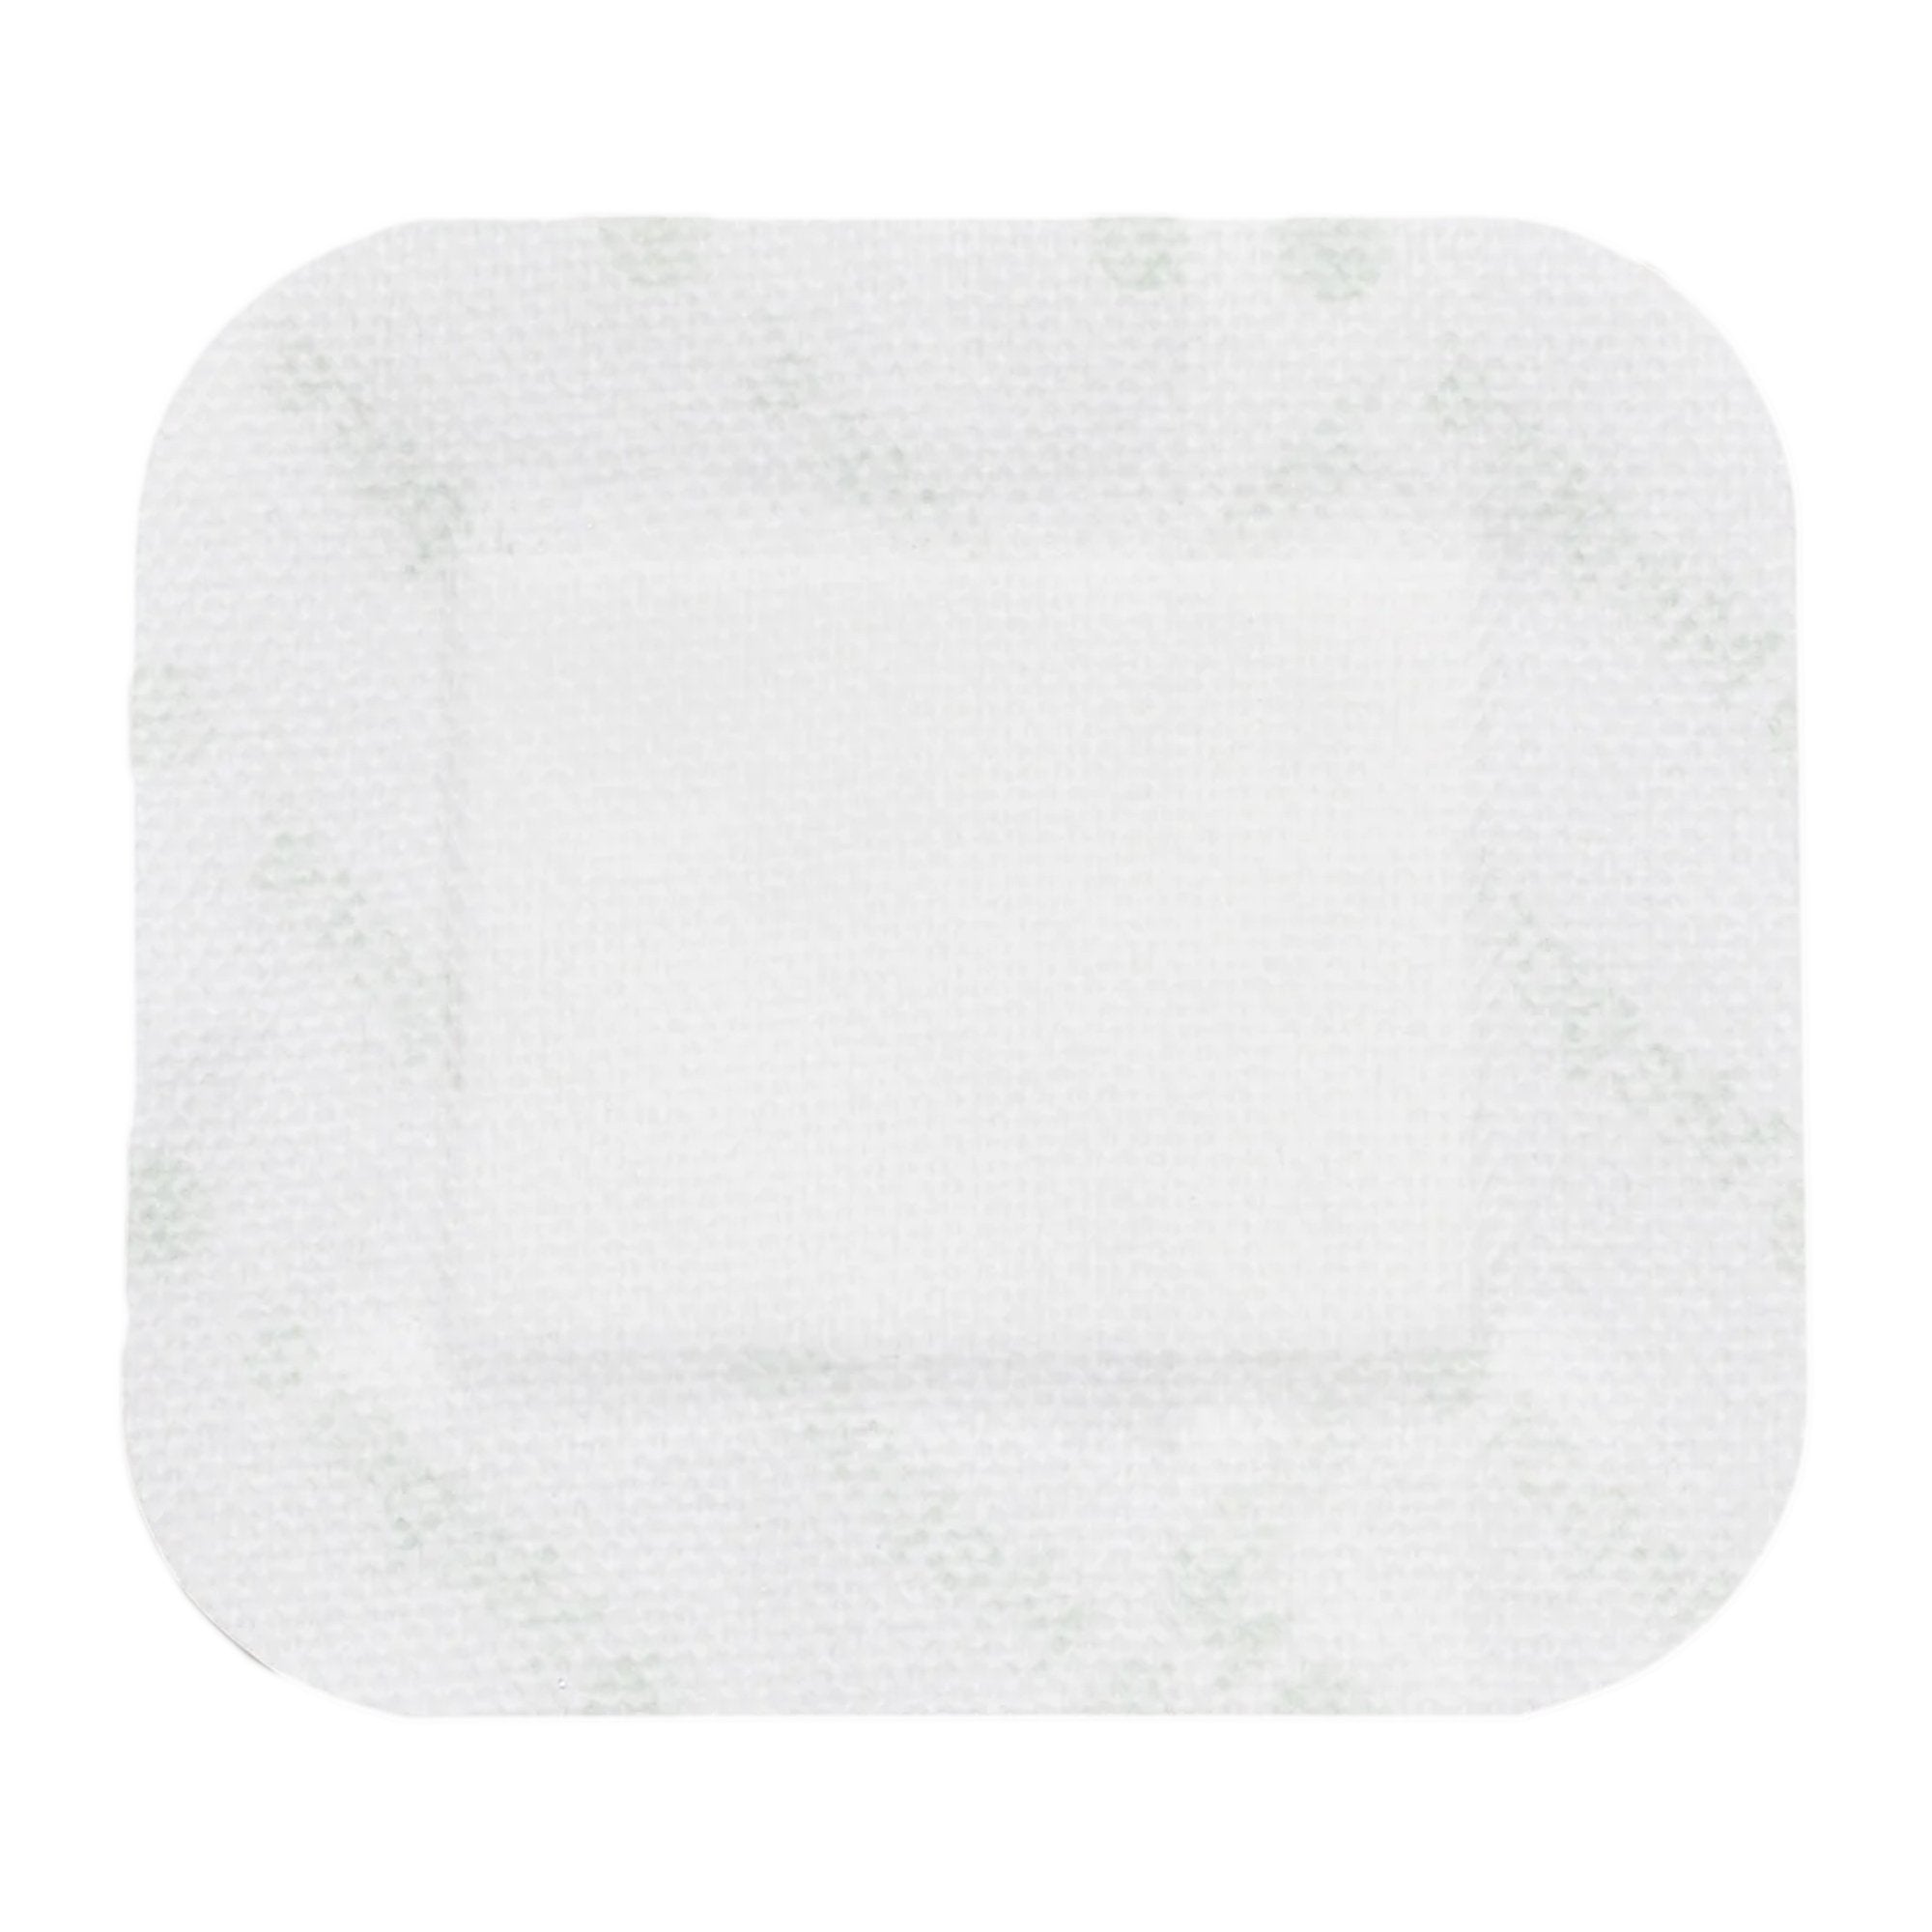 Adhesive Dressing Mepore® 2-1/2 X 3 Inch Nonwoven Spunlace Polyester Rectangle White Sterile